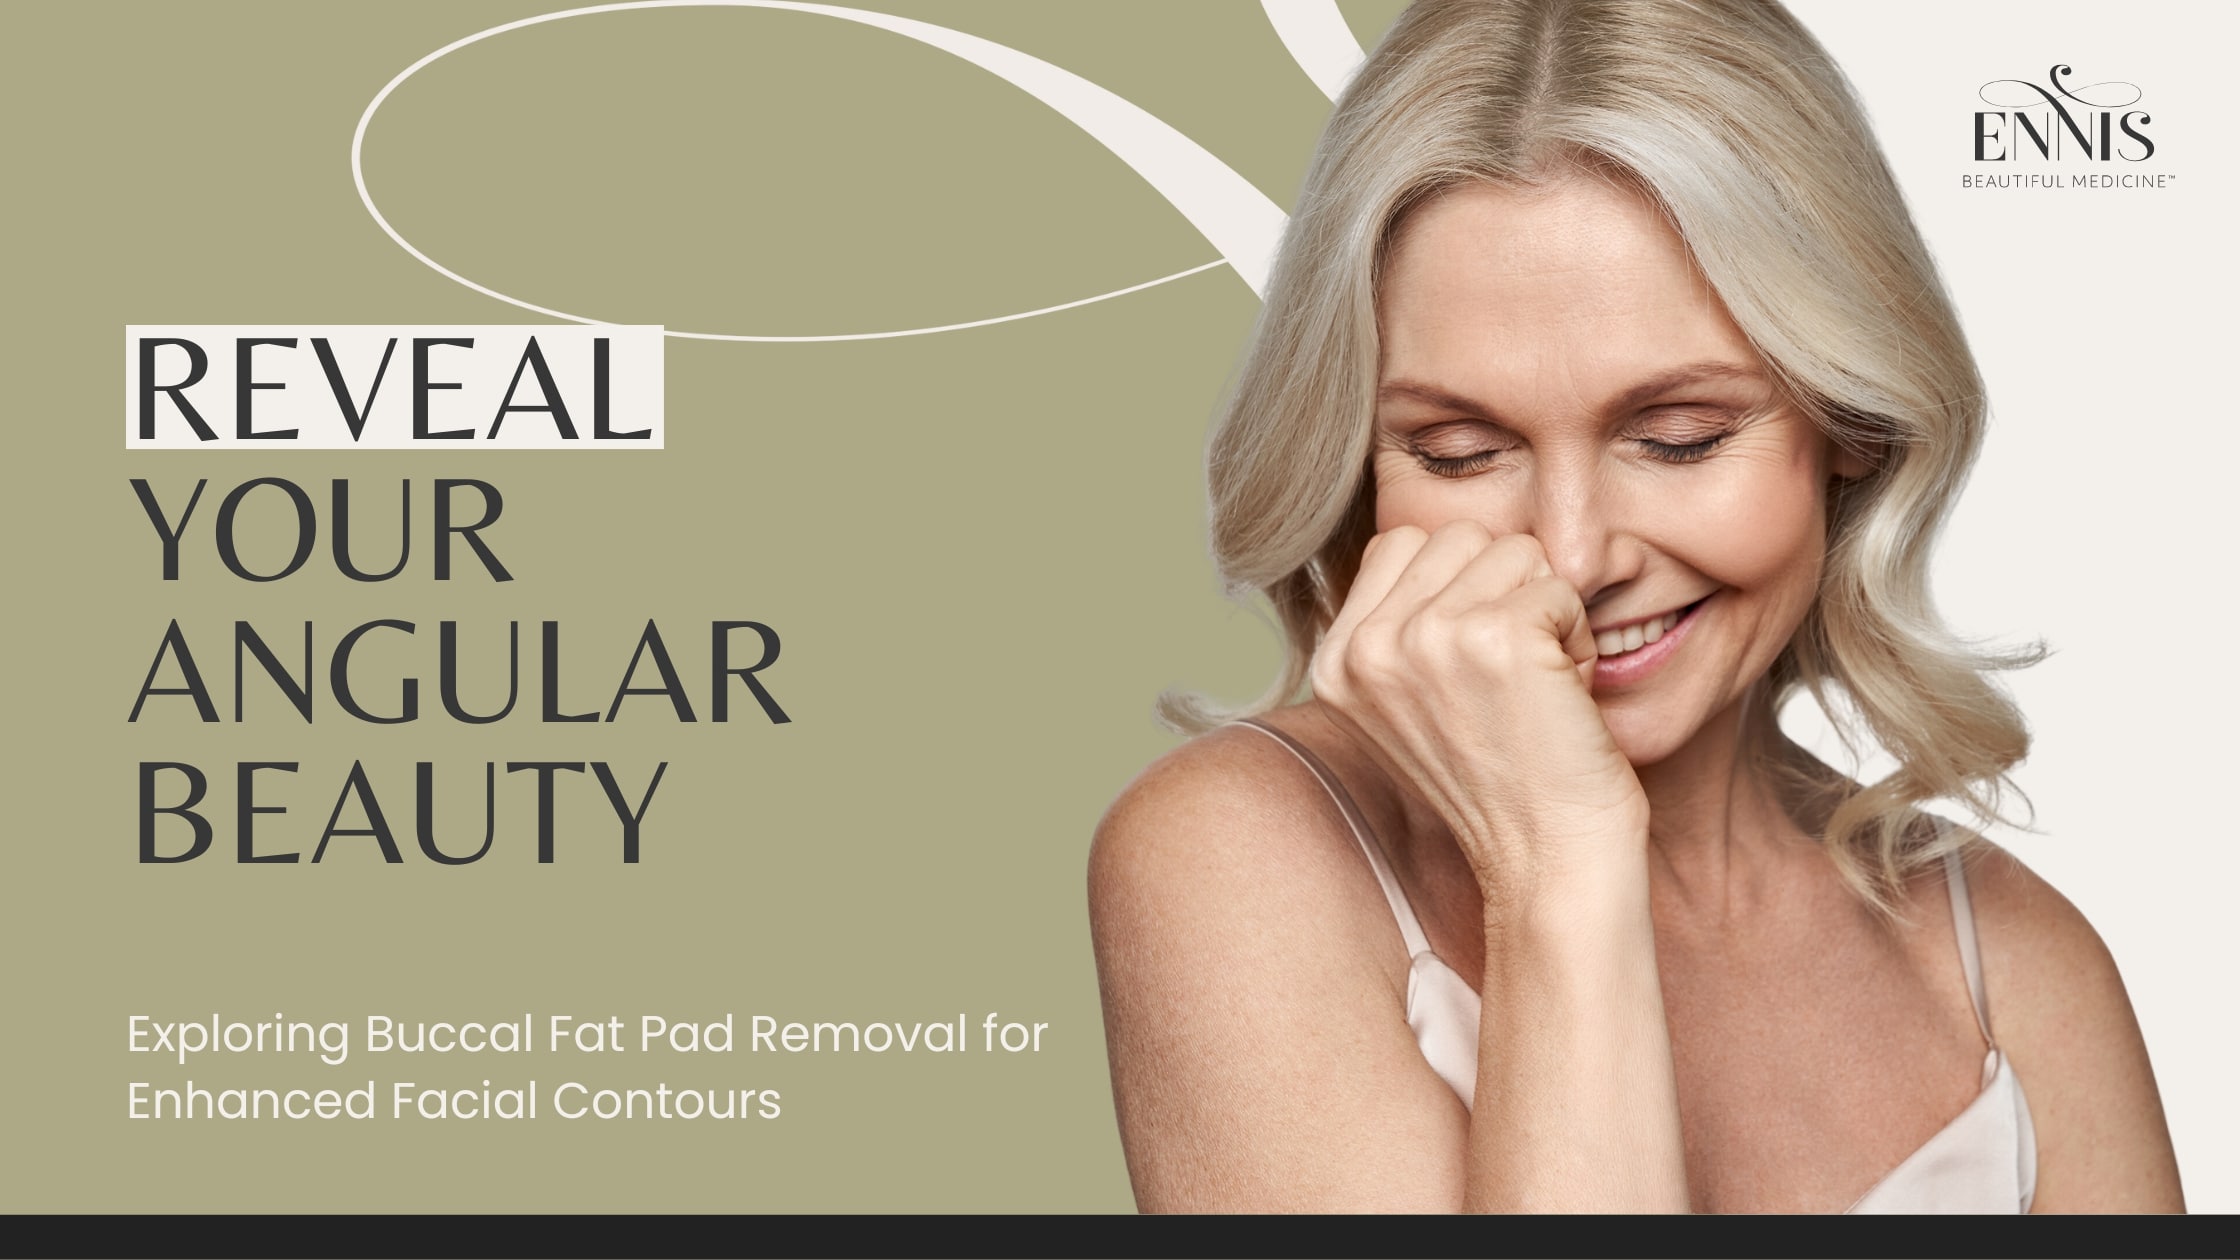 Buccal Fat Pad Treatment Process with Dr. Ennis in Boca Raton